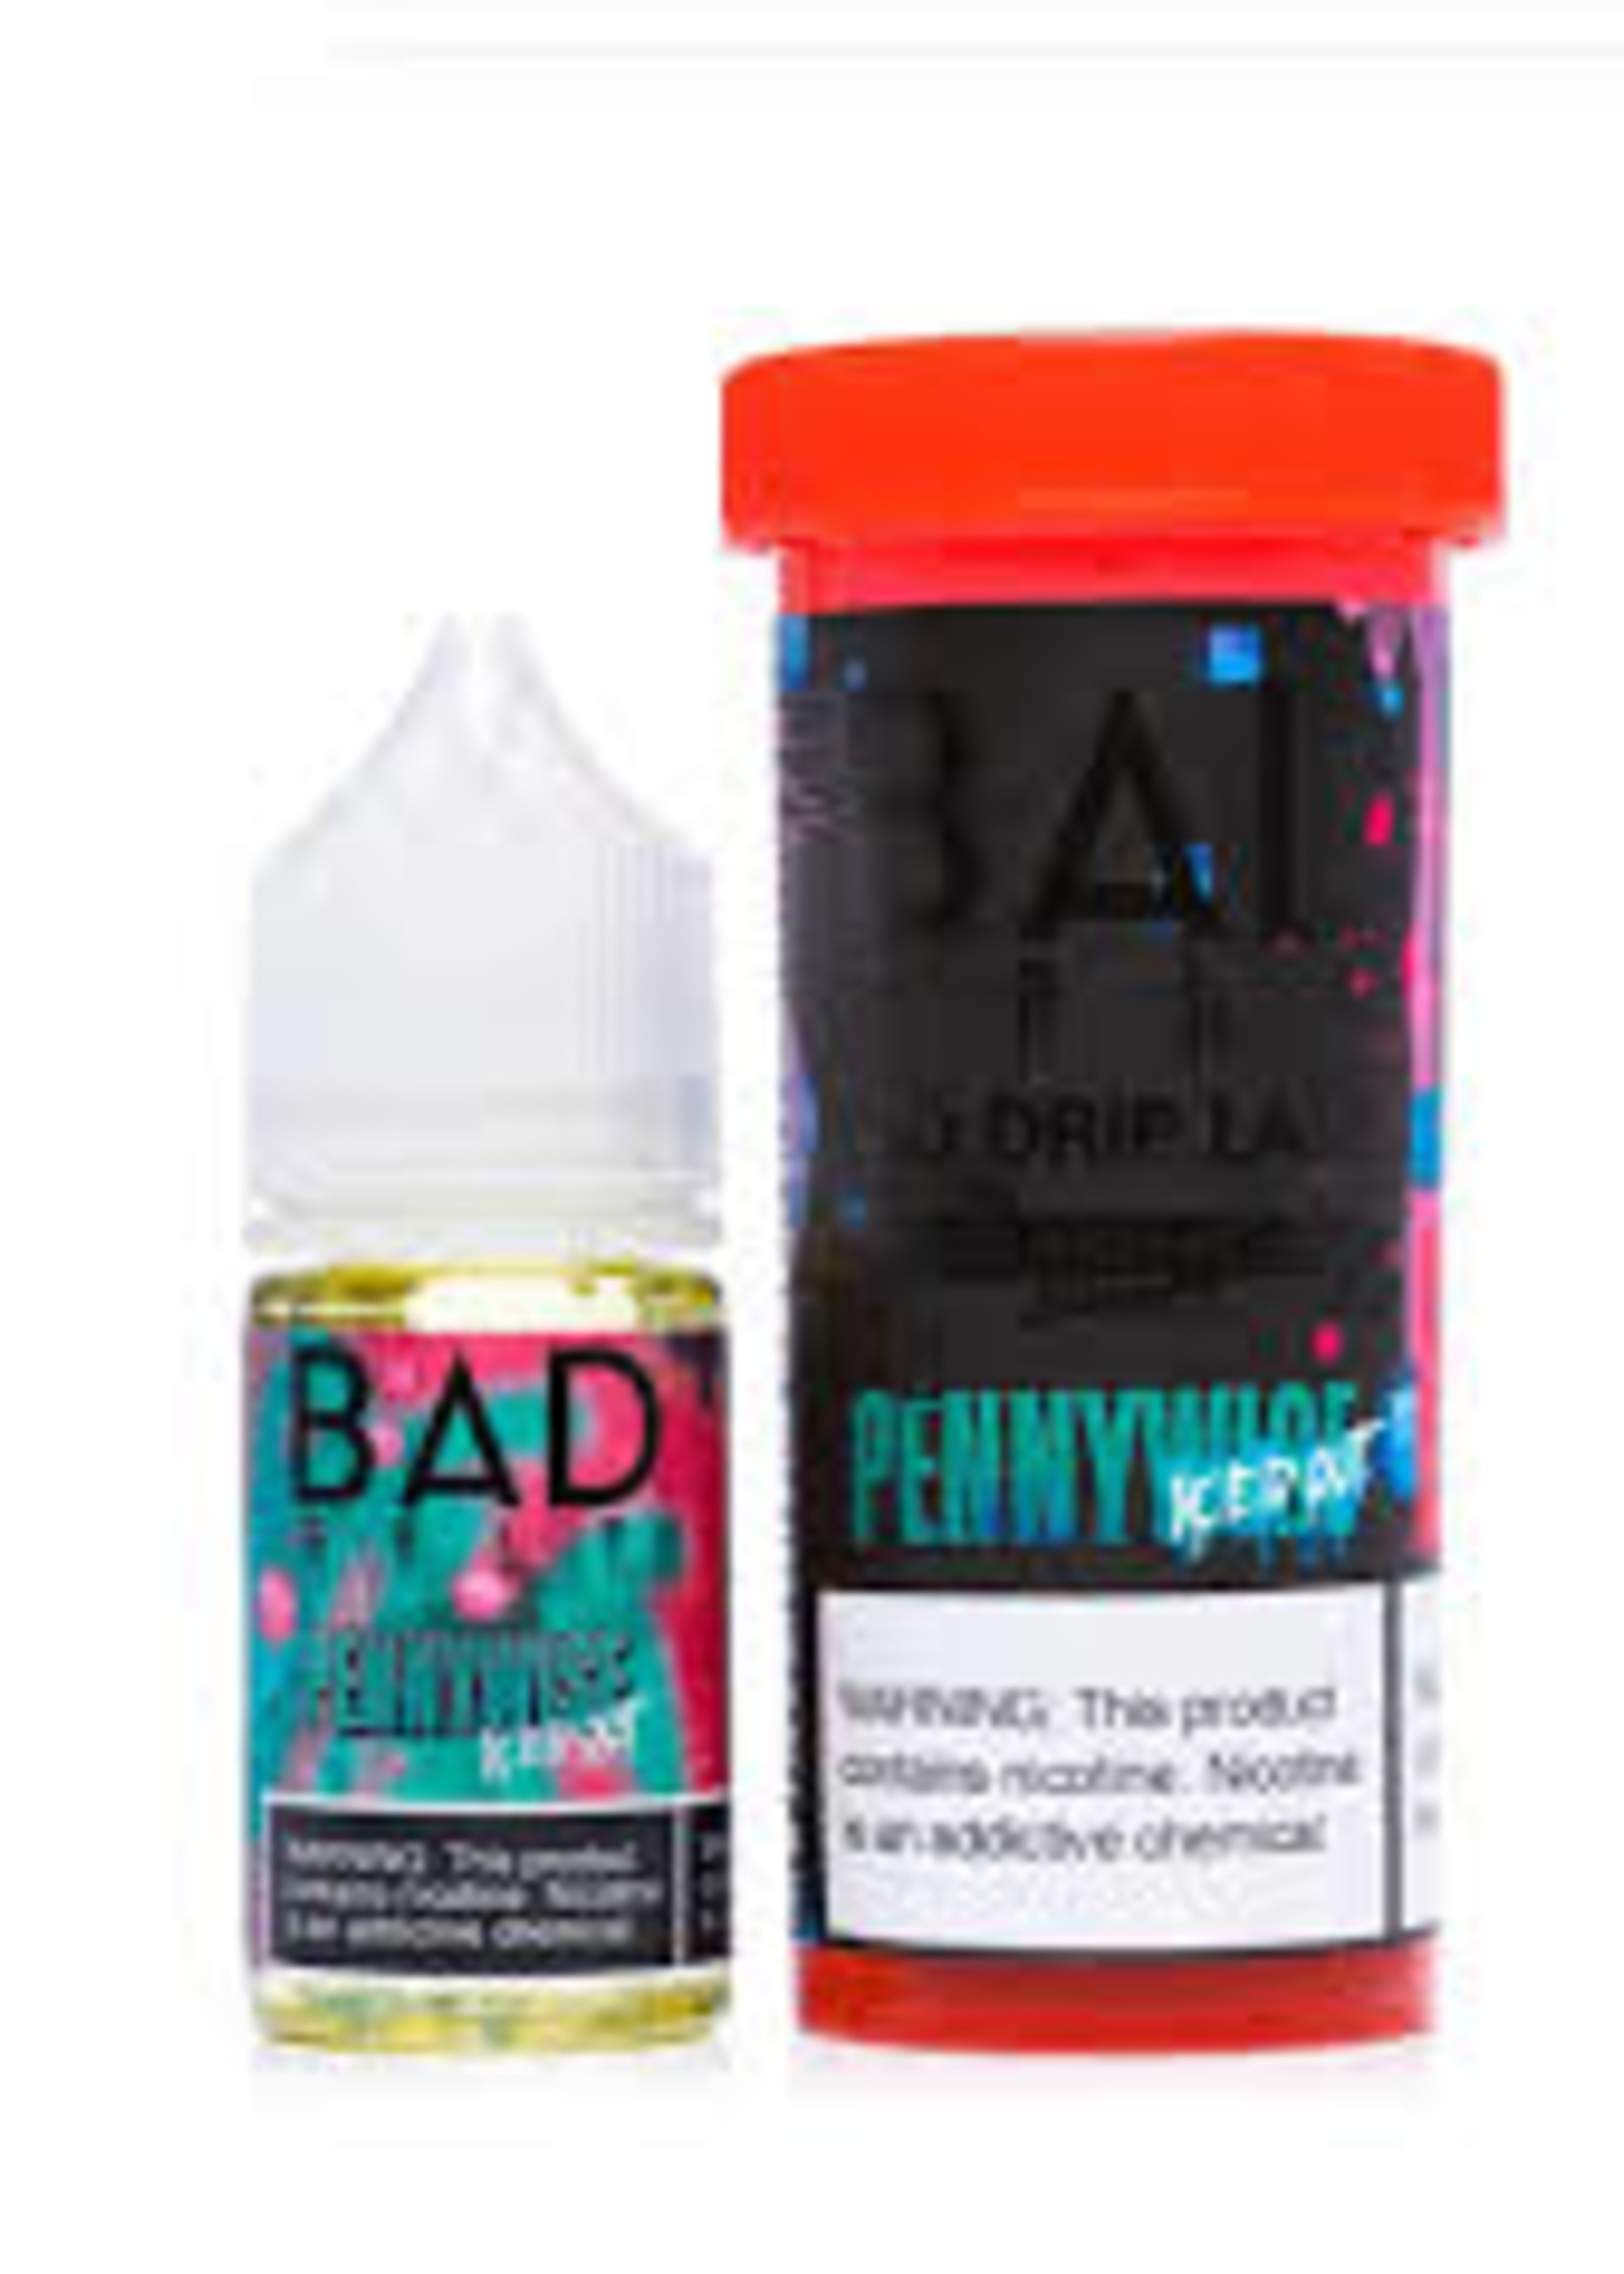 Bad Drip Bad Drip Bad Salt 30mL - Pennywise Iced Out 45mg